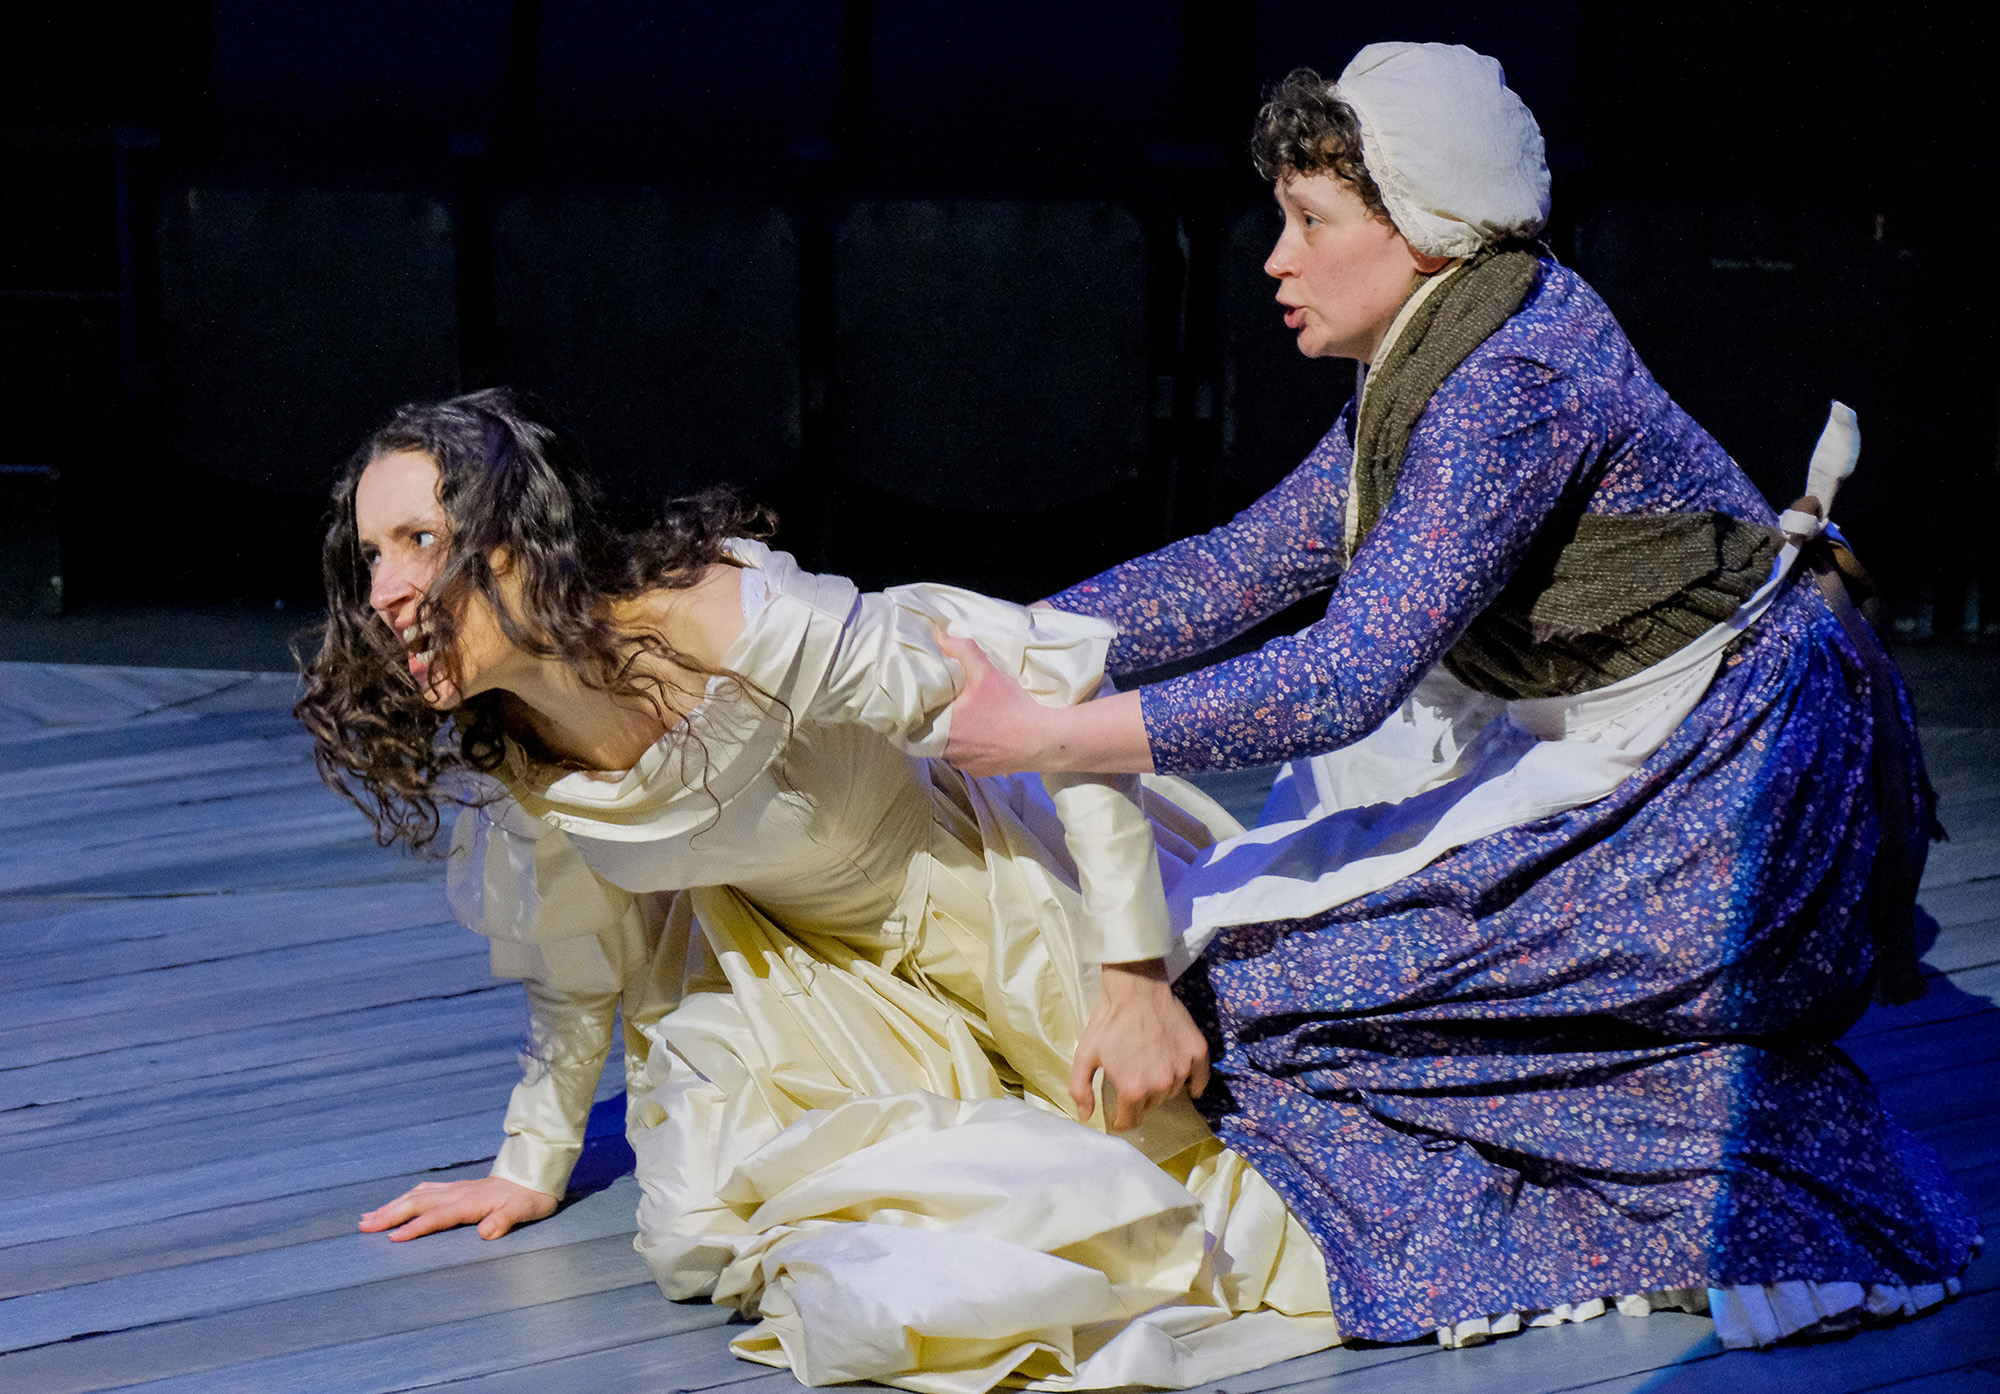 theatre performance image: a performer in a wedding dress is being held back by another in servant's clothes